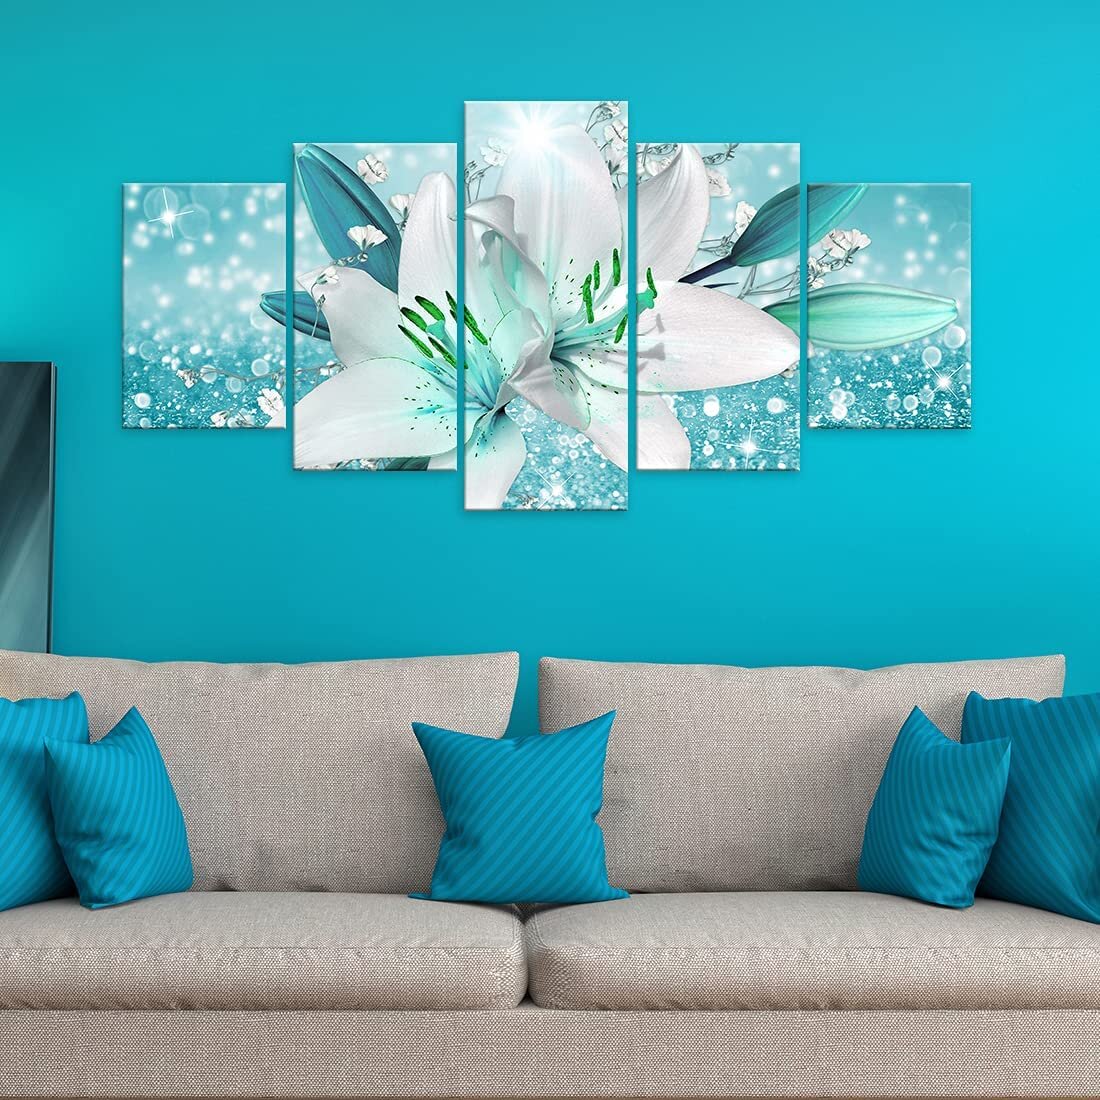 Unframed Canvas Print Paintings Lily Flowers Picture Home Bedroom Wall Art 